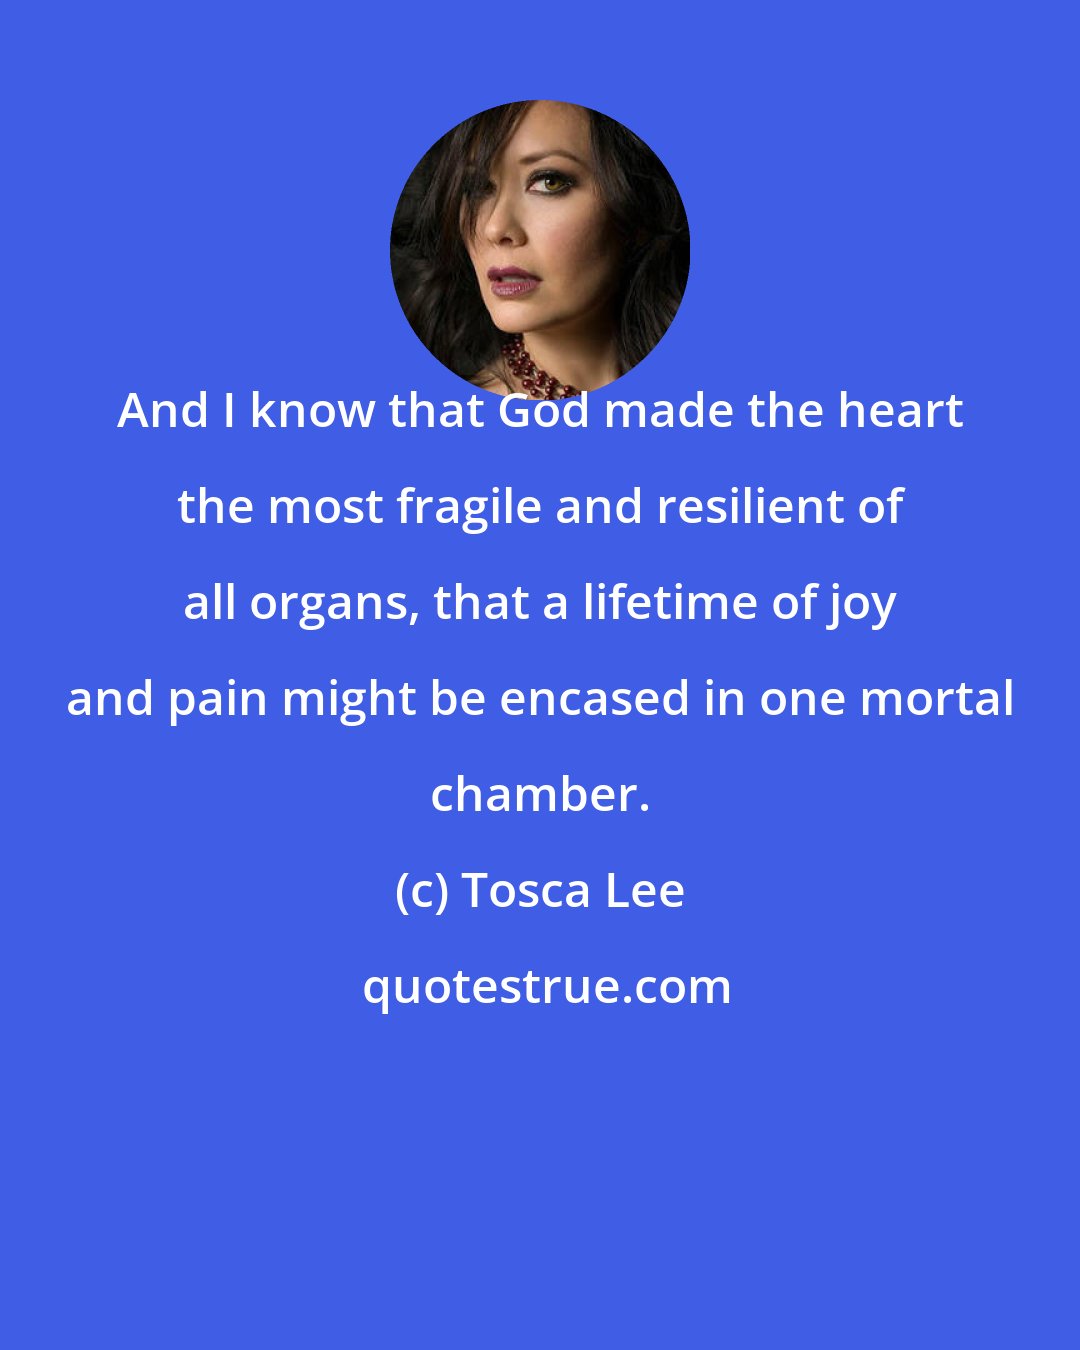 Tosca Lee: And I know that God made the heart the most fragile and resilient of all organs, that a lifetime of joy and pain might be encased in one mortal chamber.